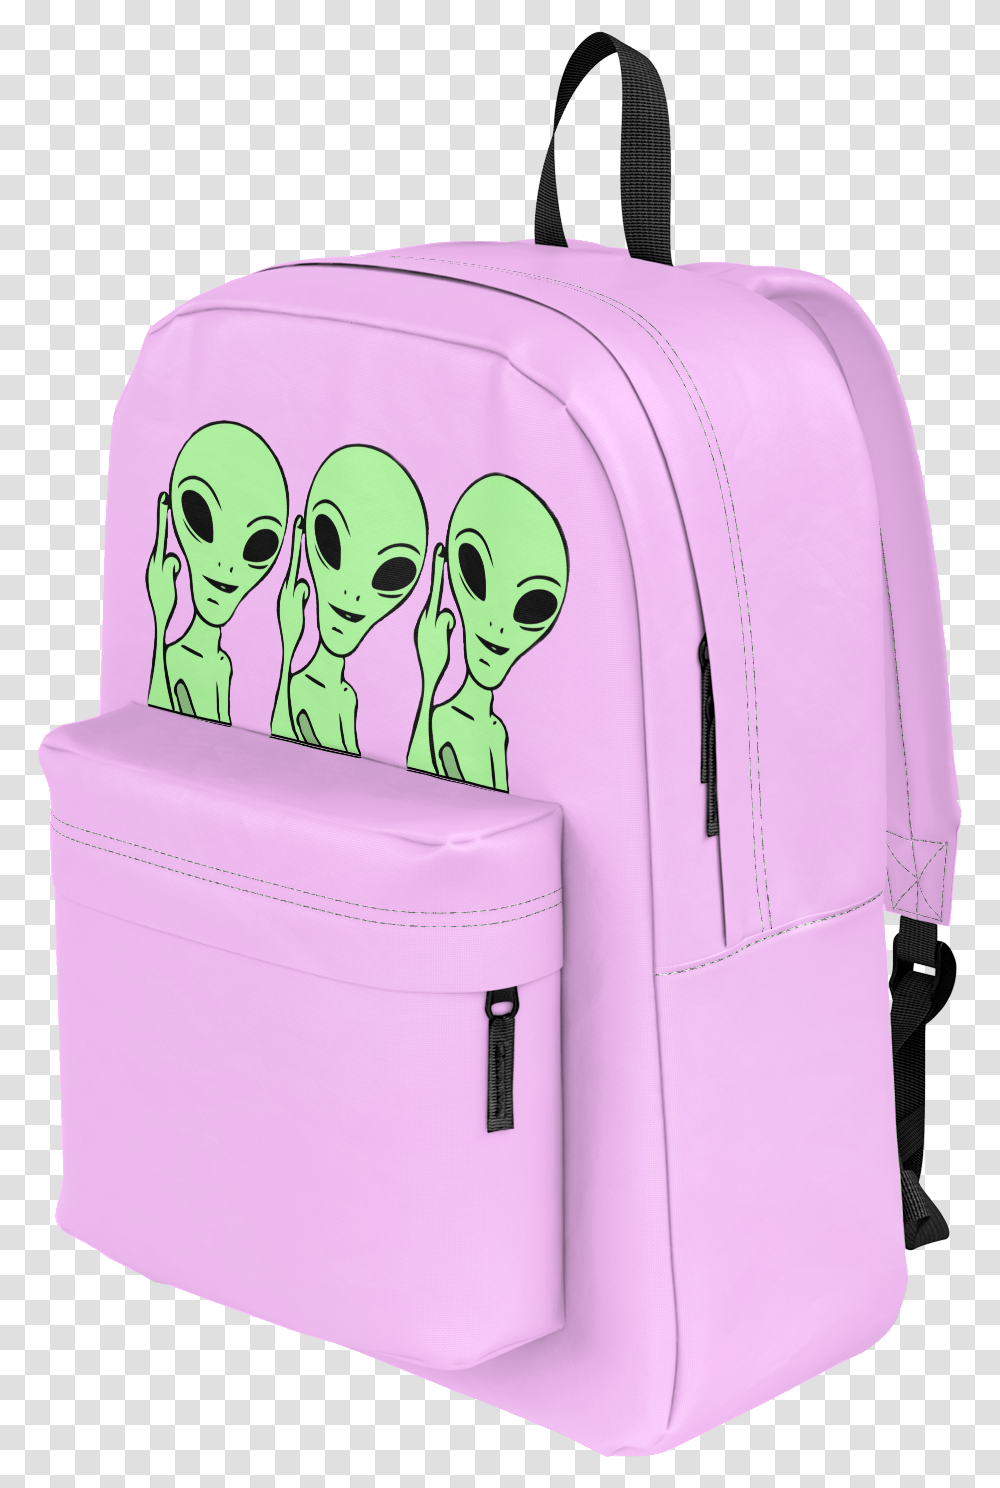 Aphmau Merch Backpack Download Laptop Bag, Luggage, Suitcase, White Board Transparent Png